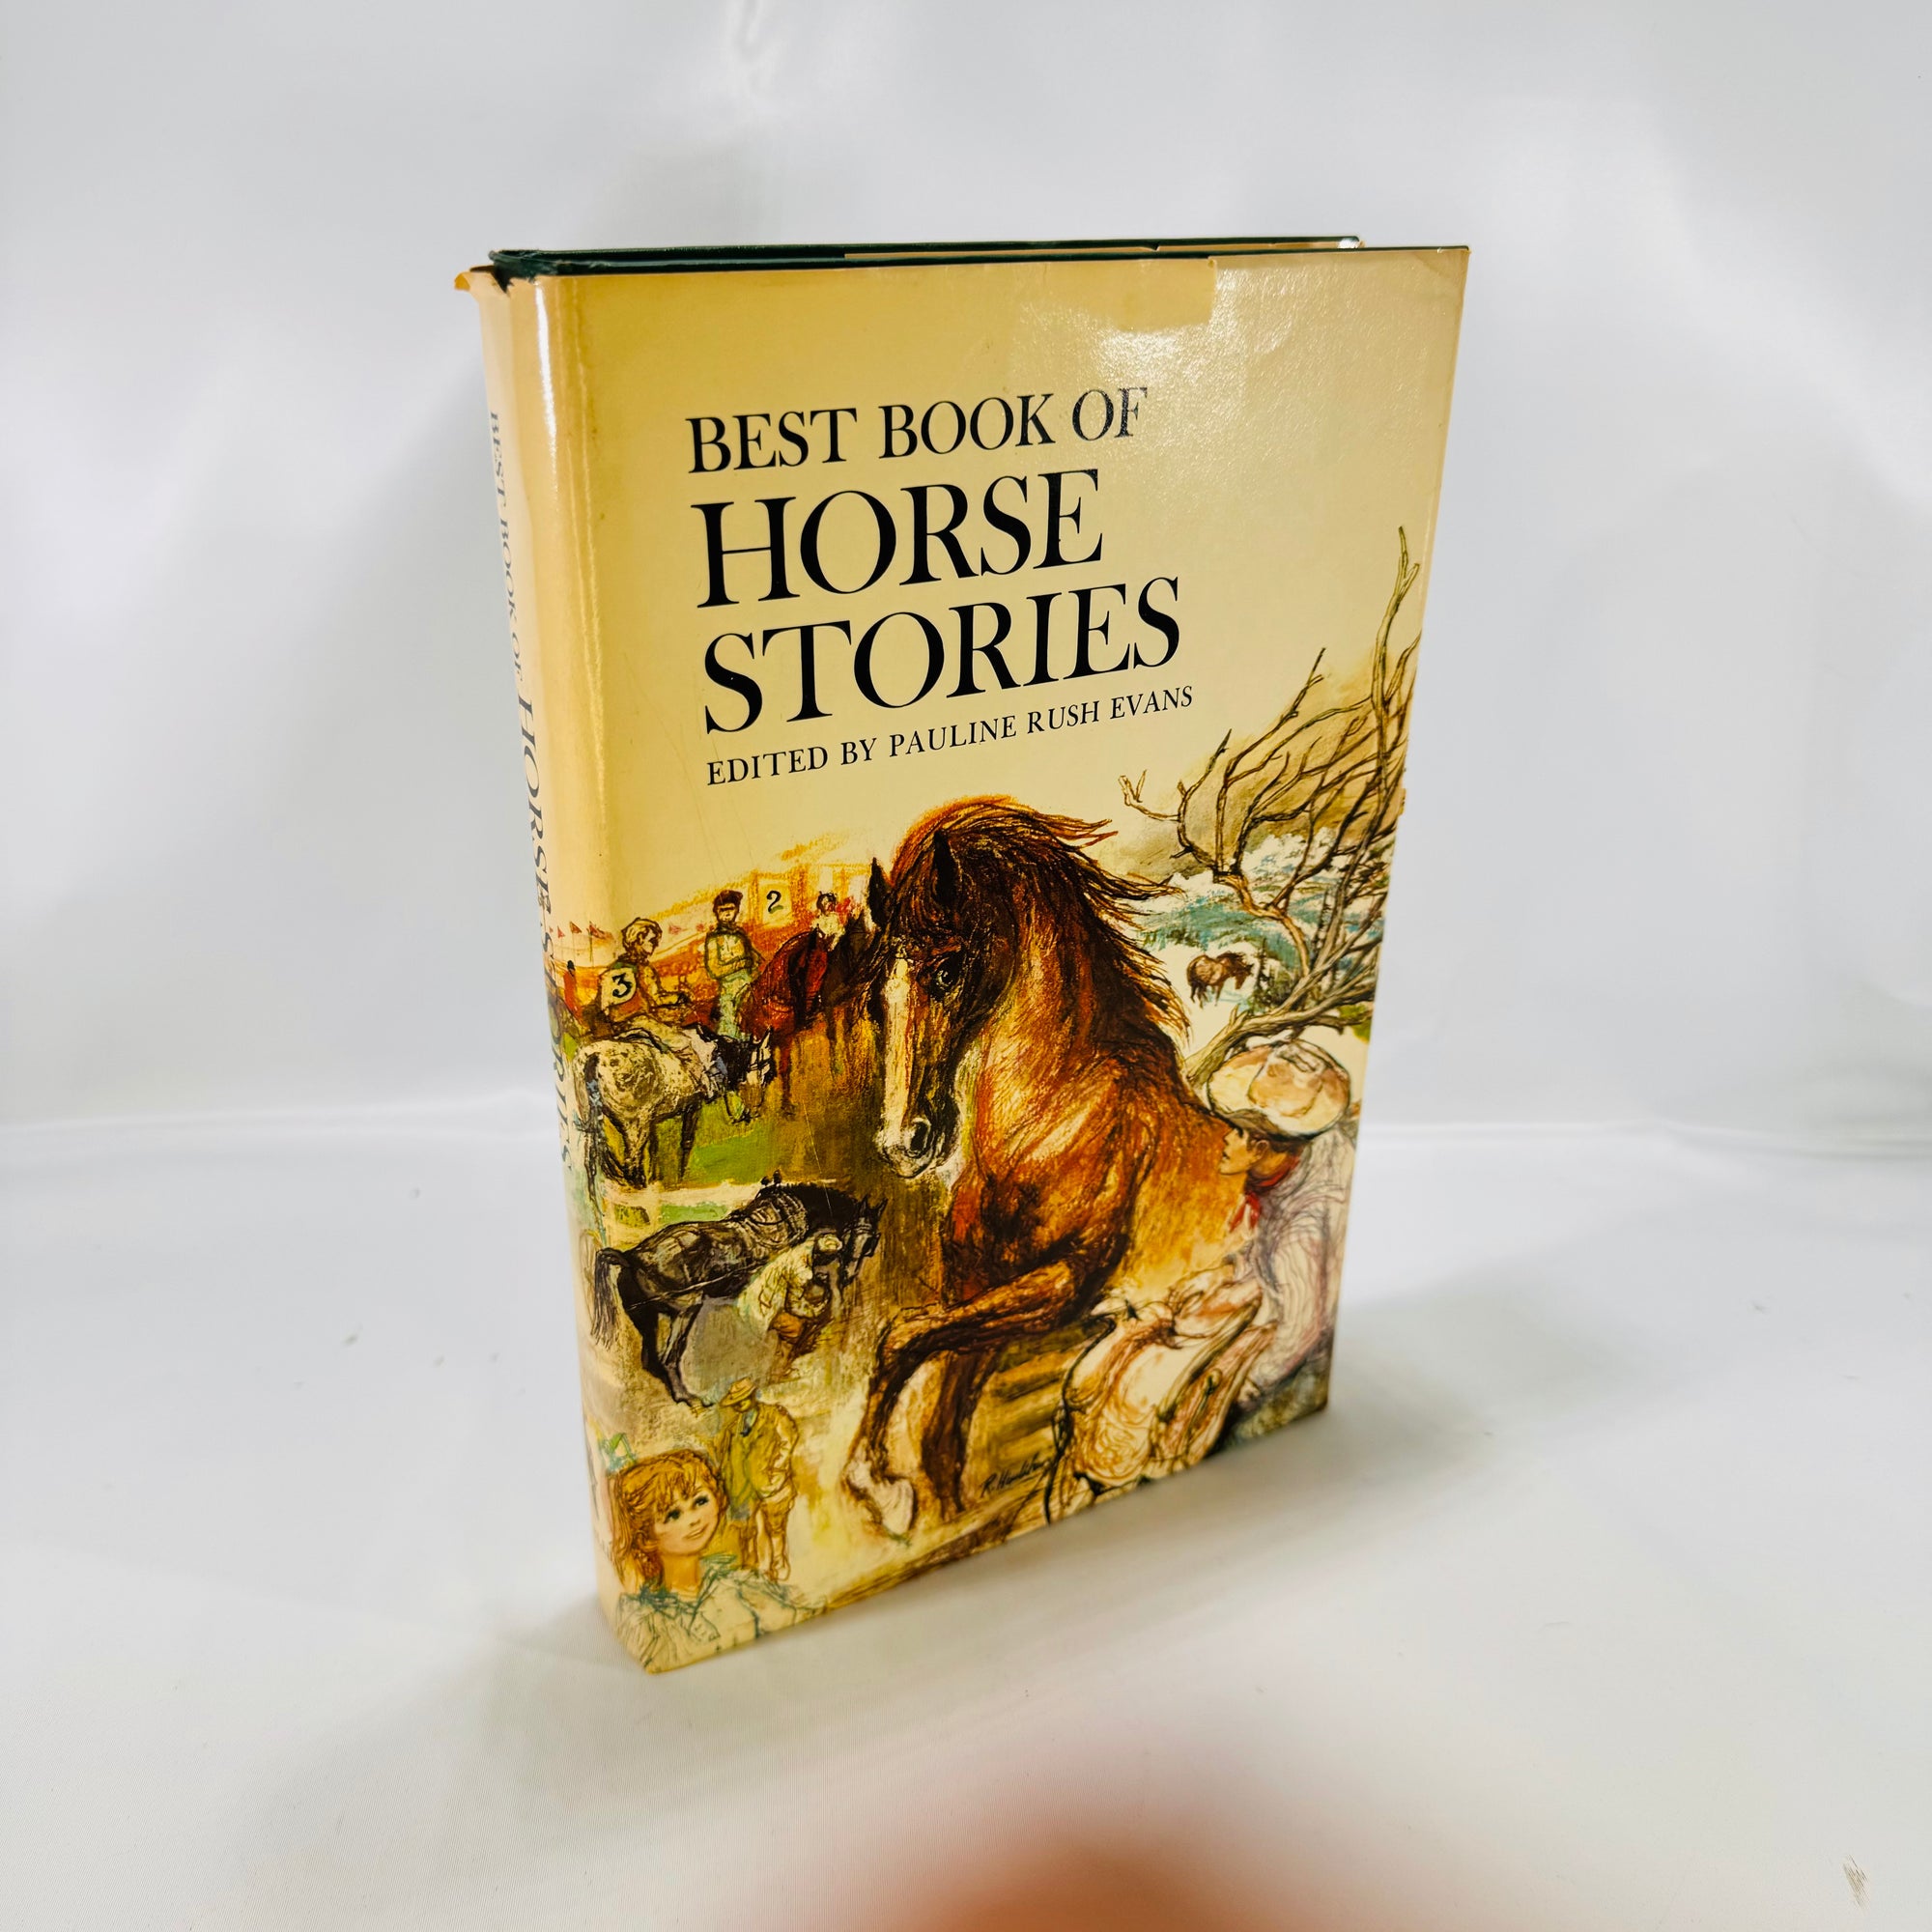 Best Book of Horse Stories edited by Pauline Rush Evans 1964 Doubleday & Company, Inc